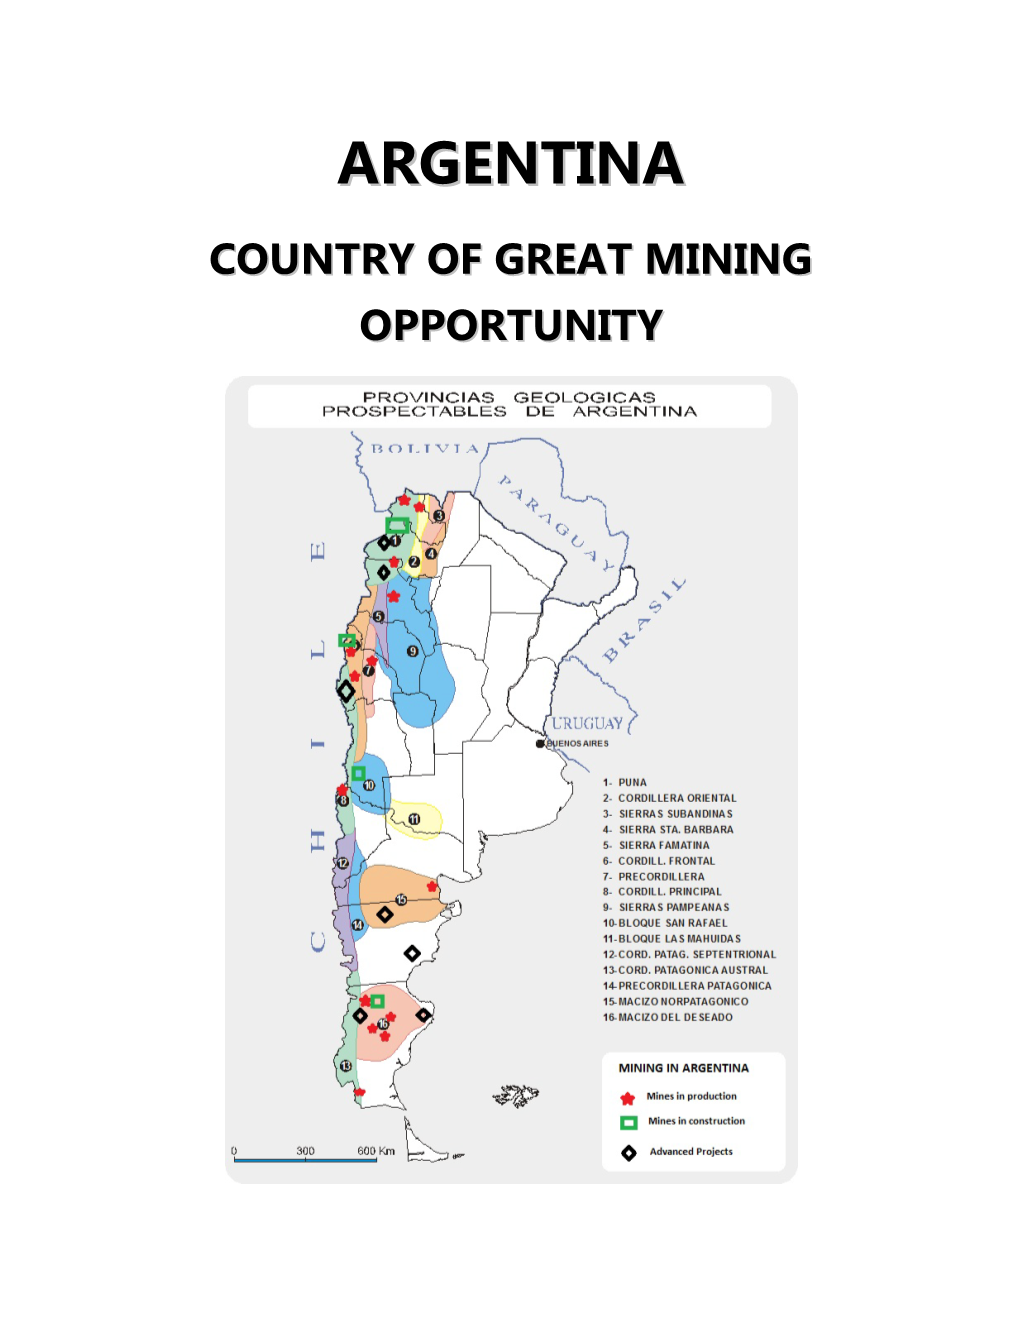 Mining-Opportunity-In-Argentina.Pdf